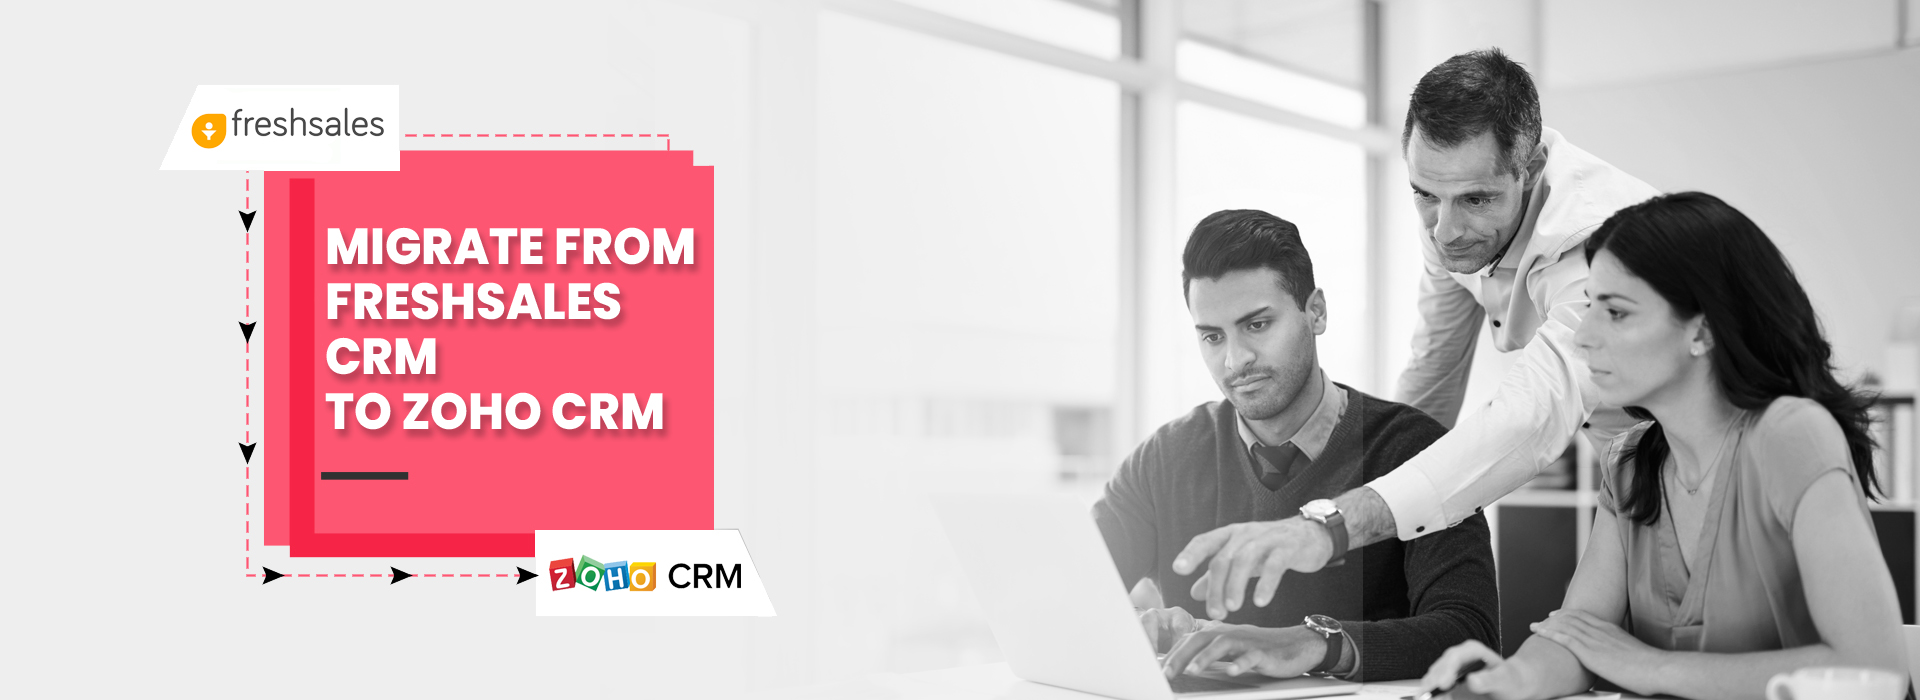 migrating freshsales crm to zoho crm